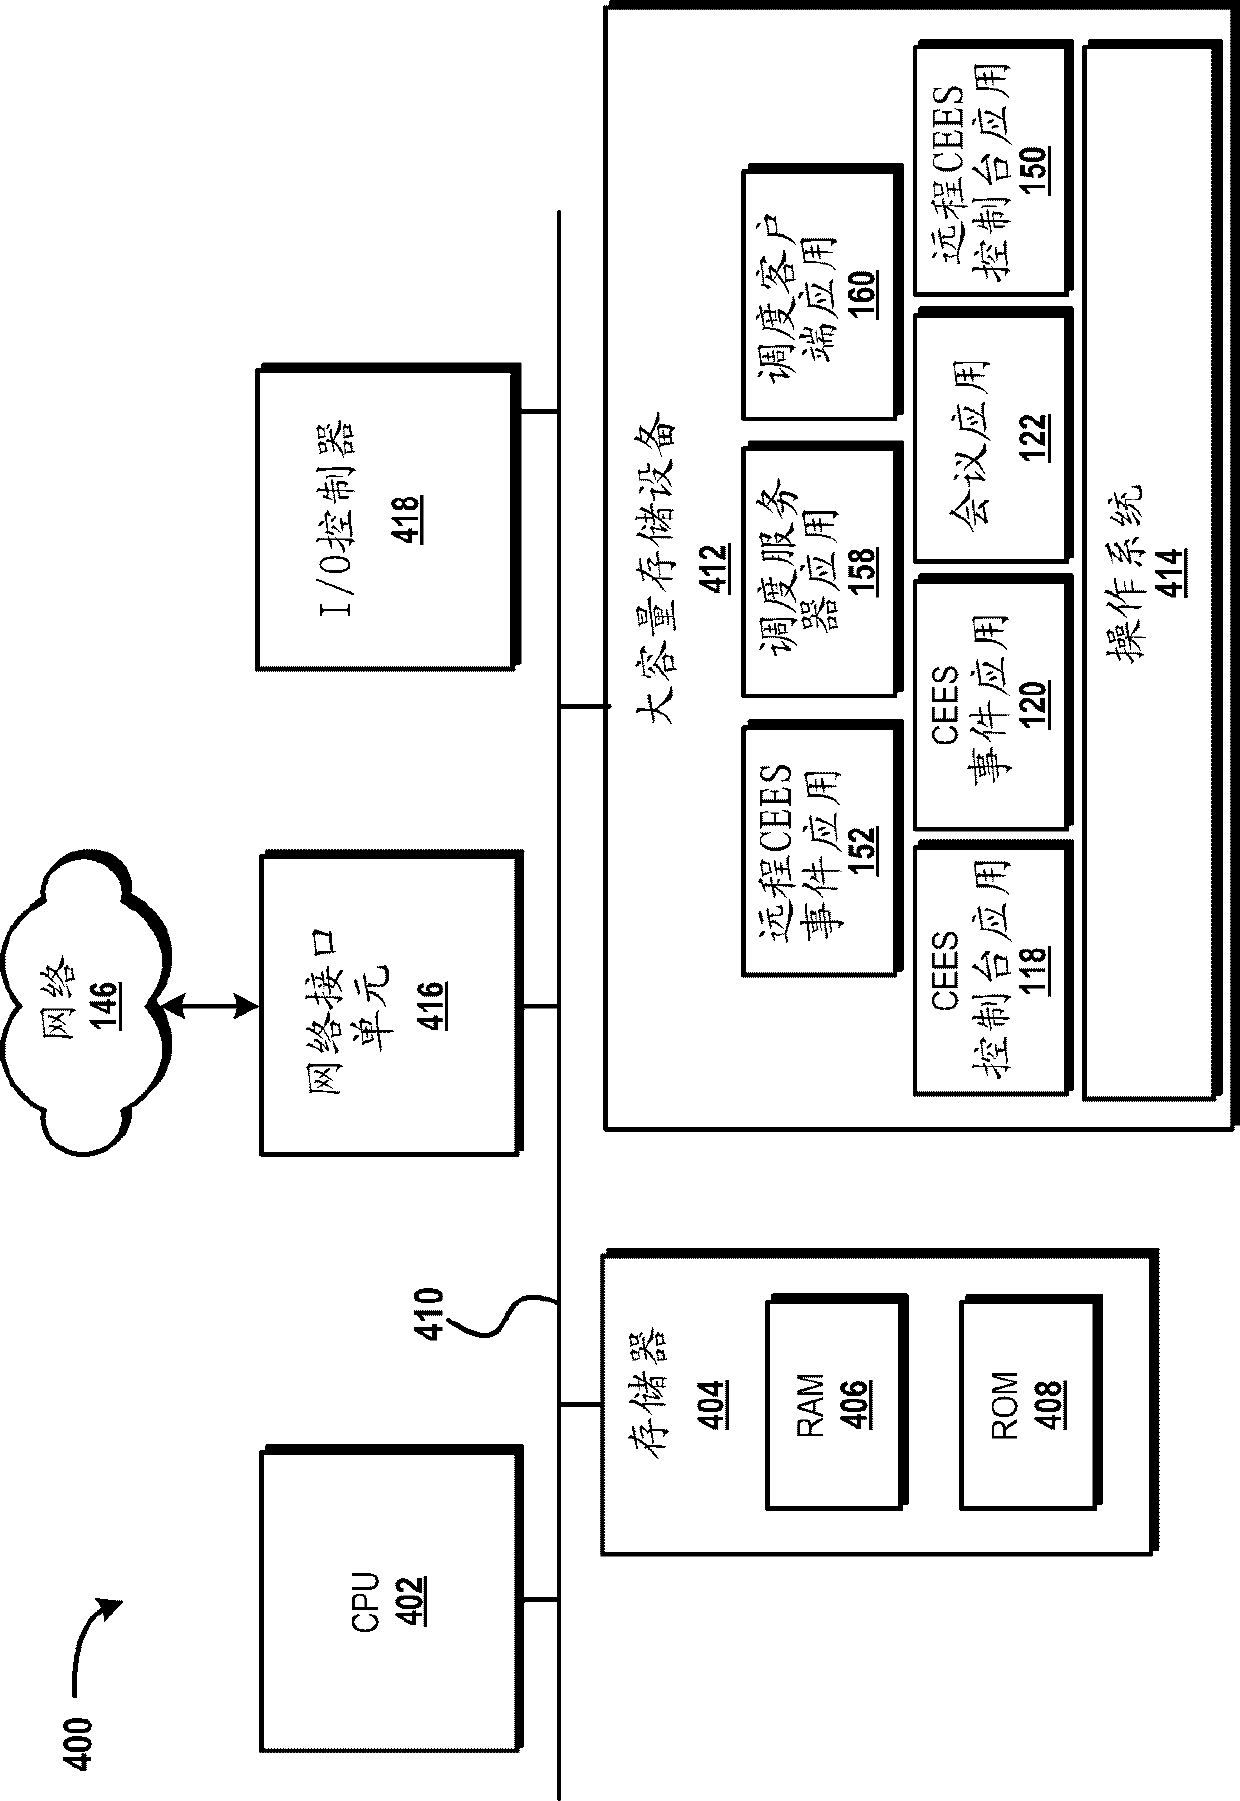 Participant authentication and authorization for joining private conference event via conference event environment system